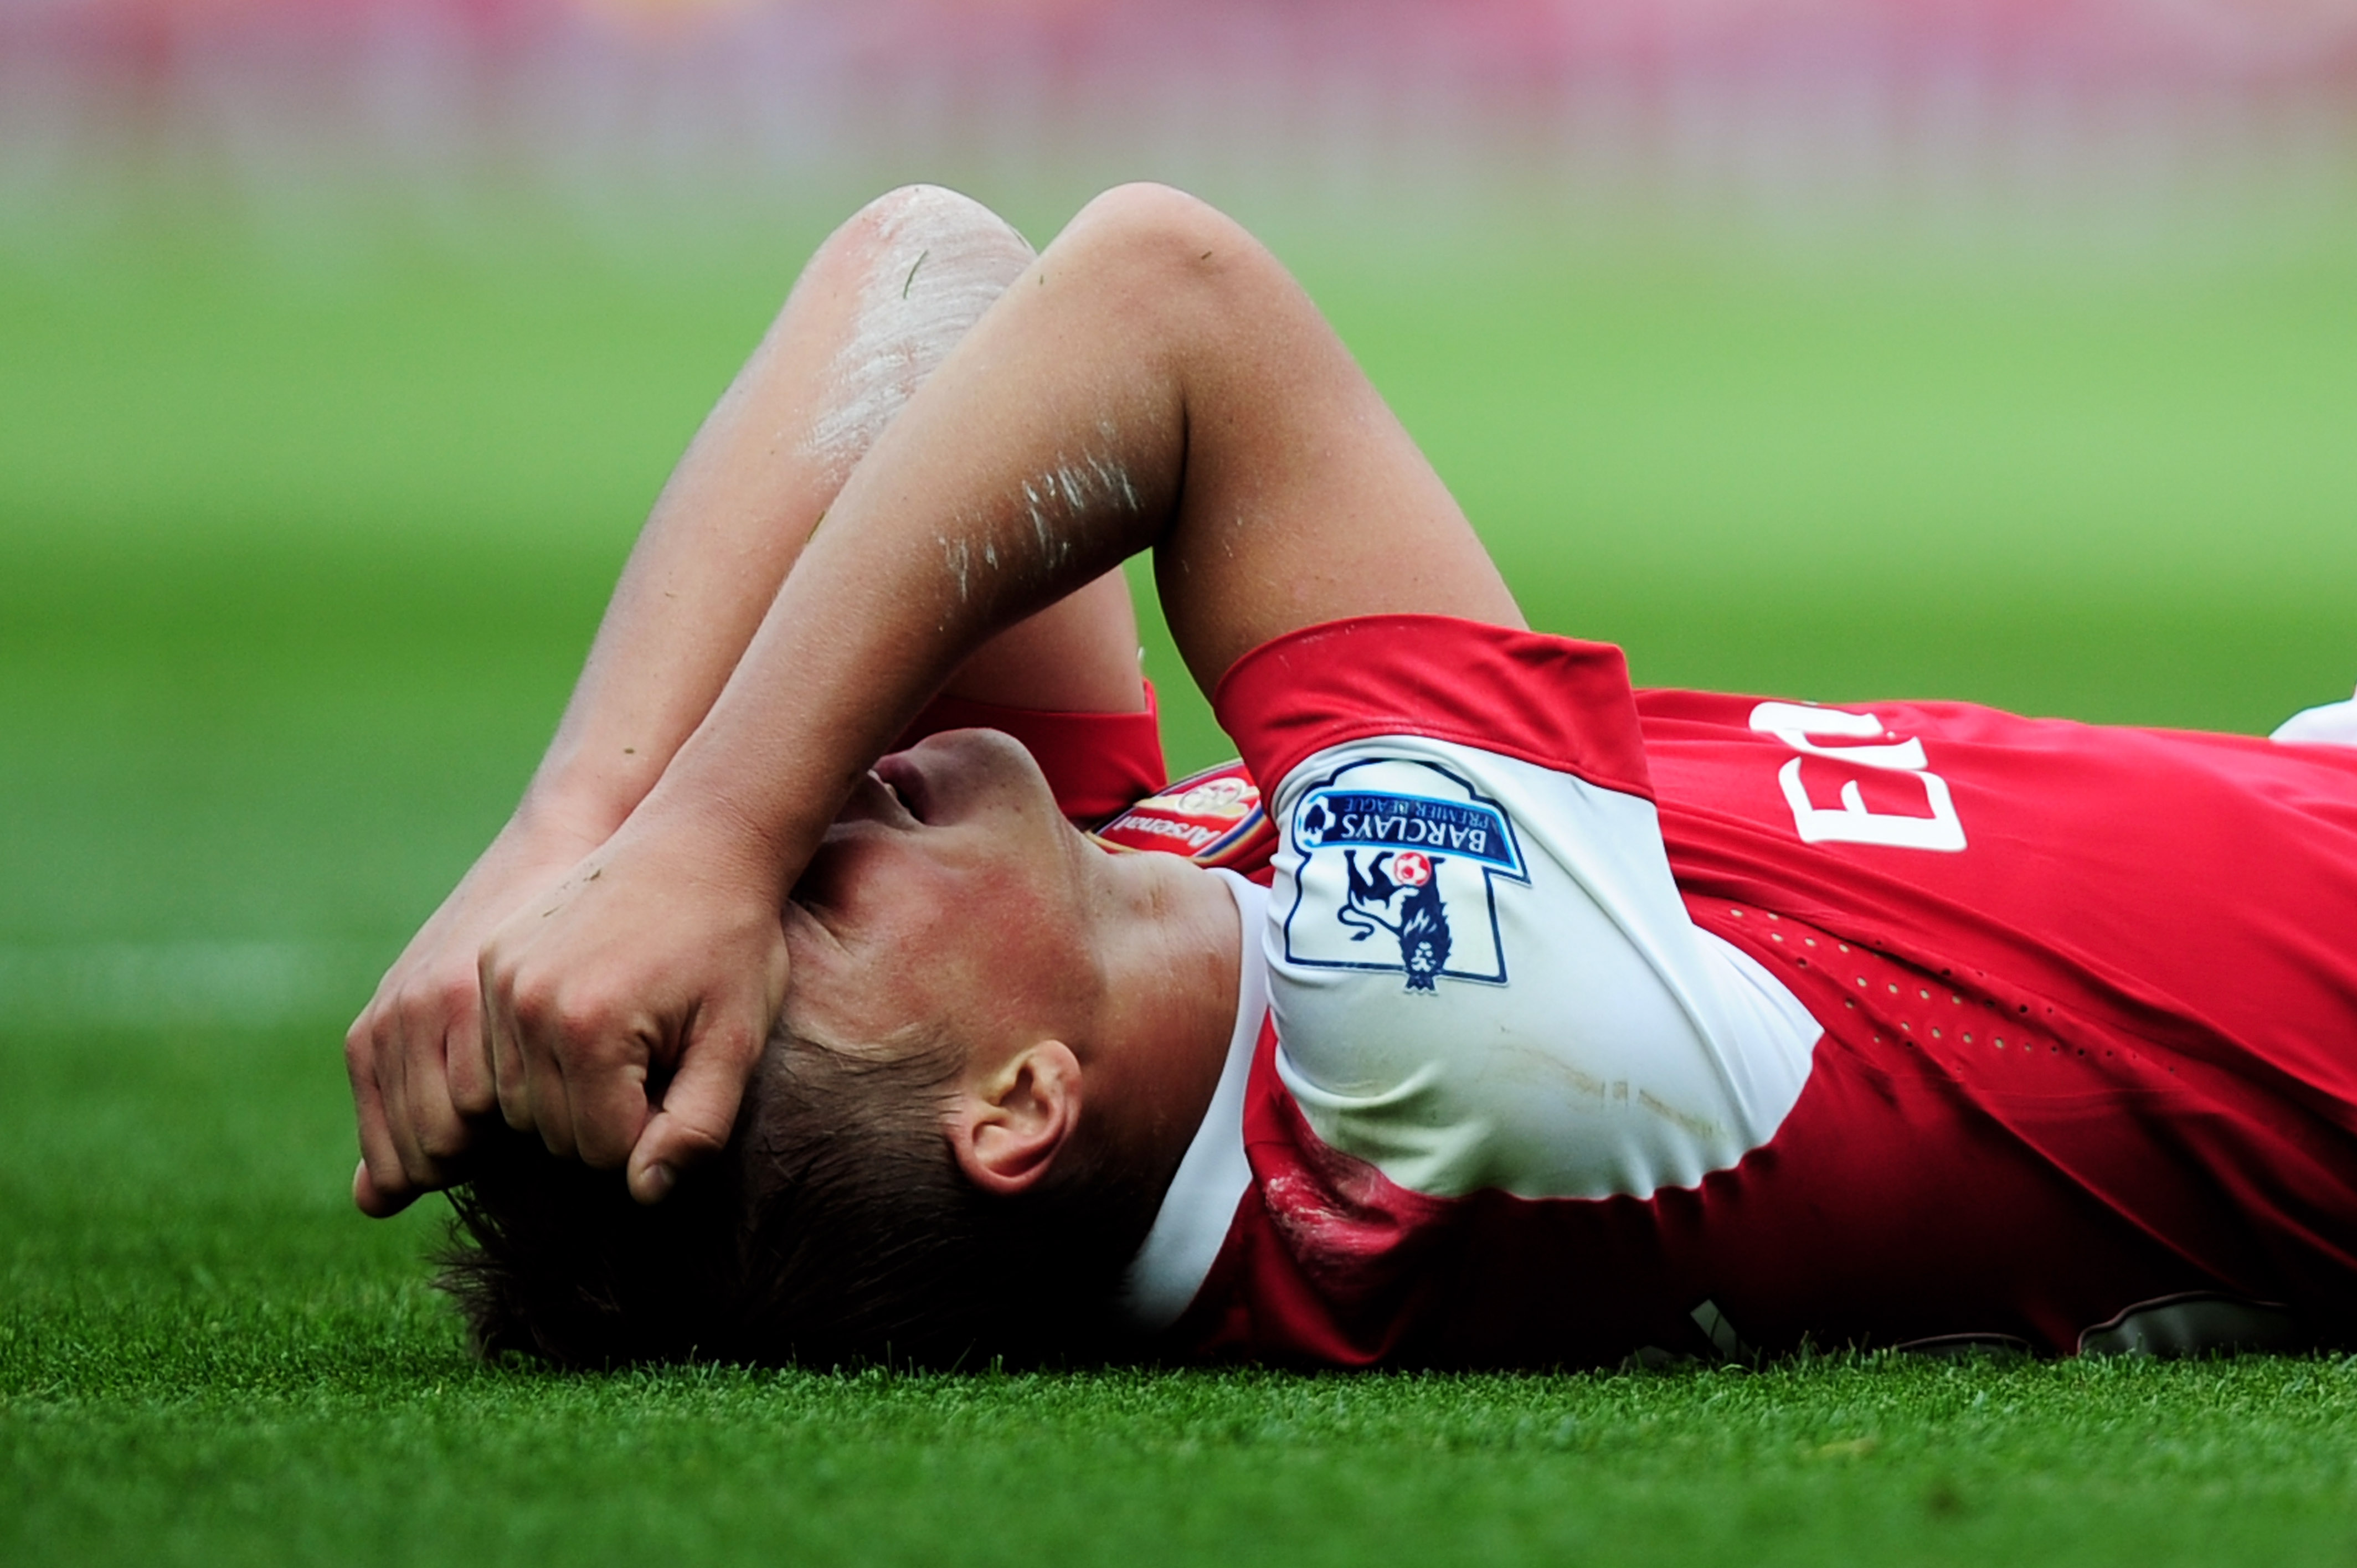 LONDON, ENGLAND - SEPTEMBER 11:  Andrei Arshavin of Arsenal holds his head after a missed chance during the Barclays Premier League match between Arsenal and Bolton Wanderers at The Emirates Stadium on September 11, 2010 in London, England.  (Photo by Jam